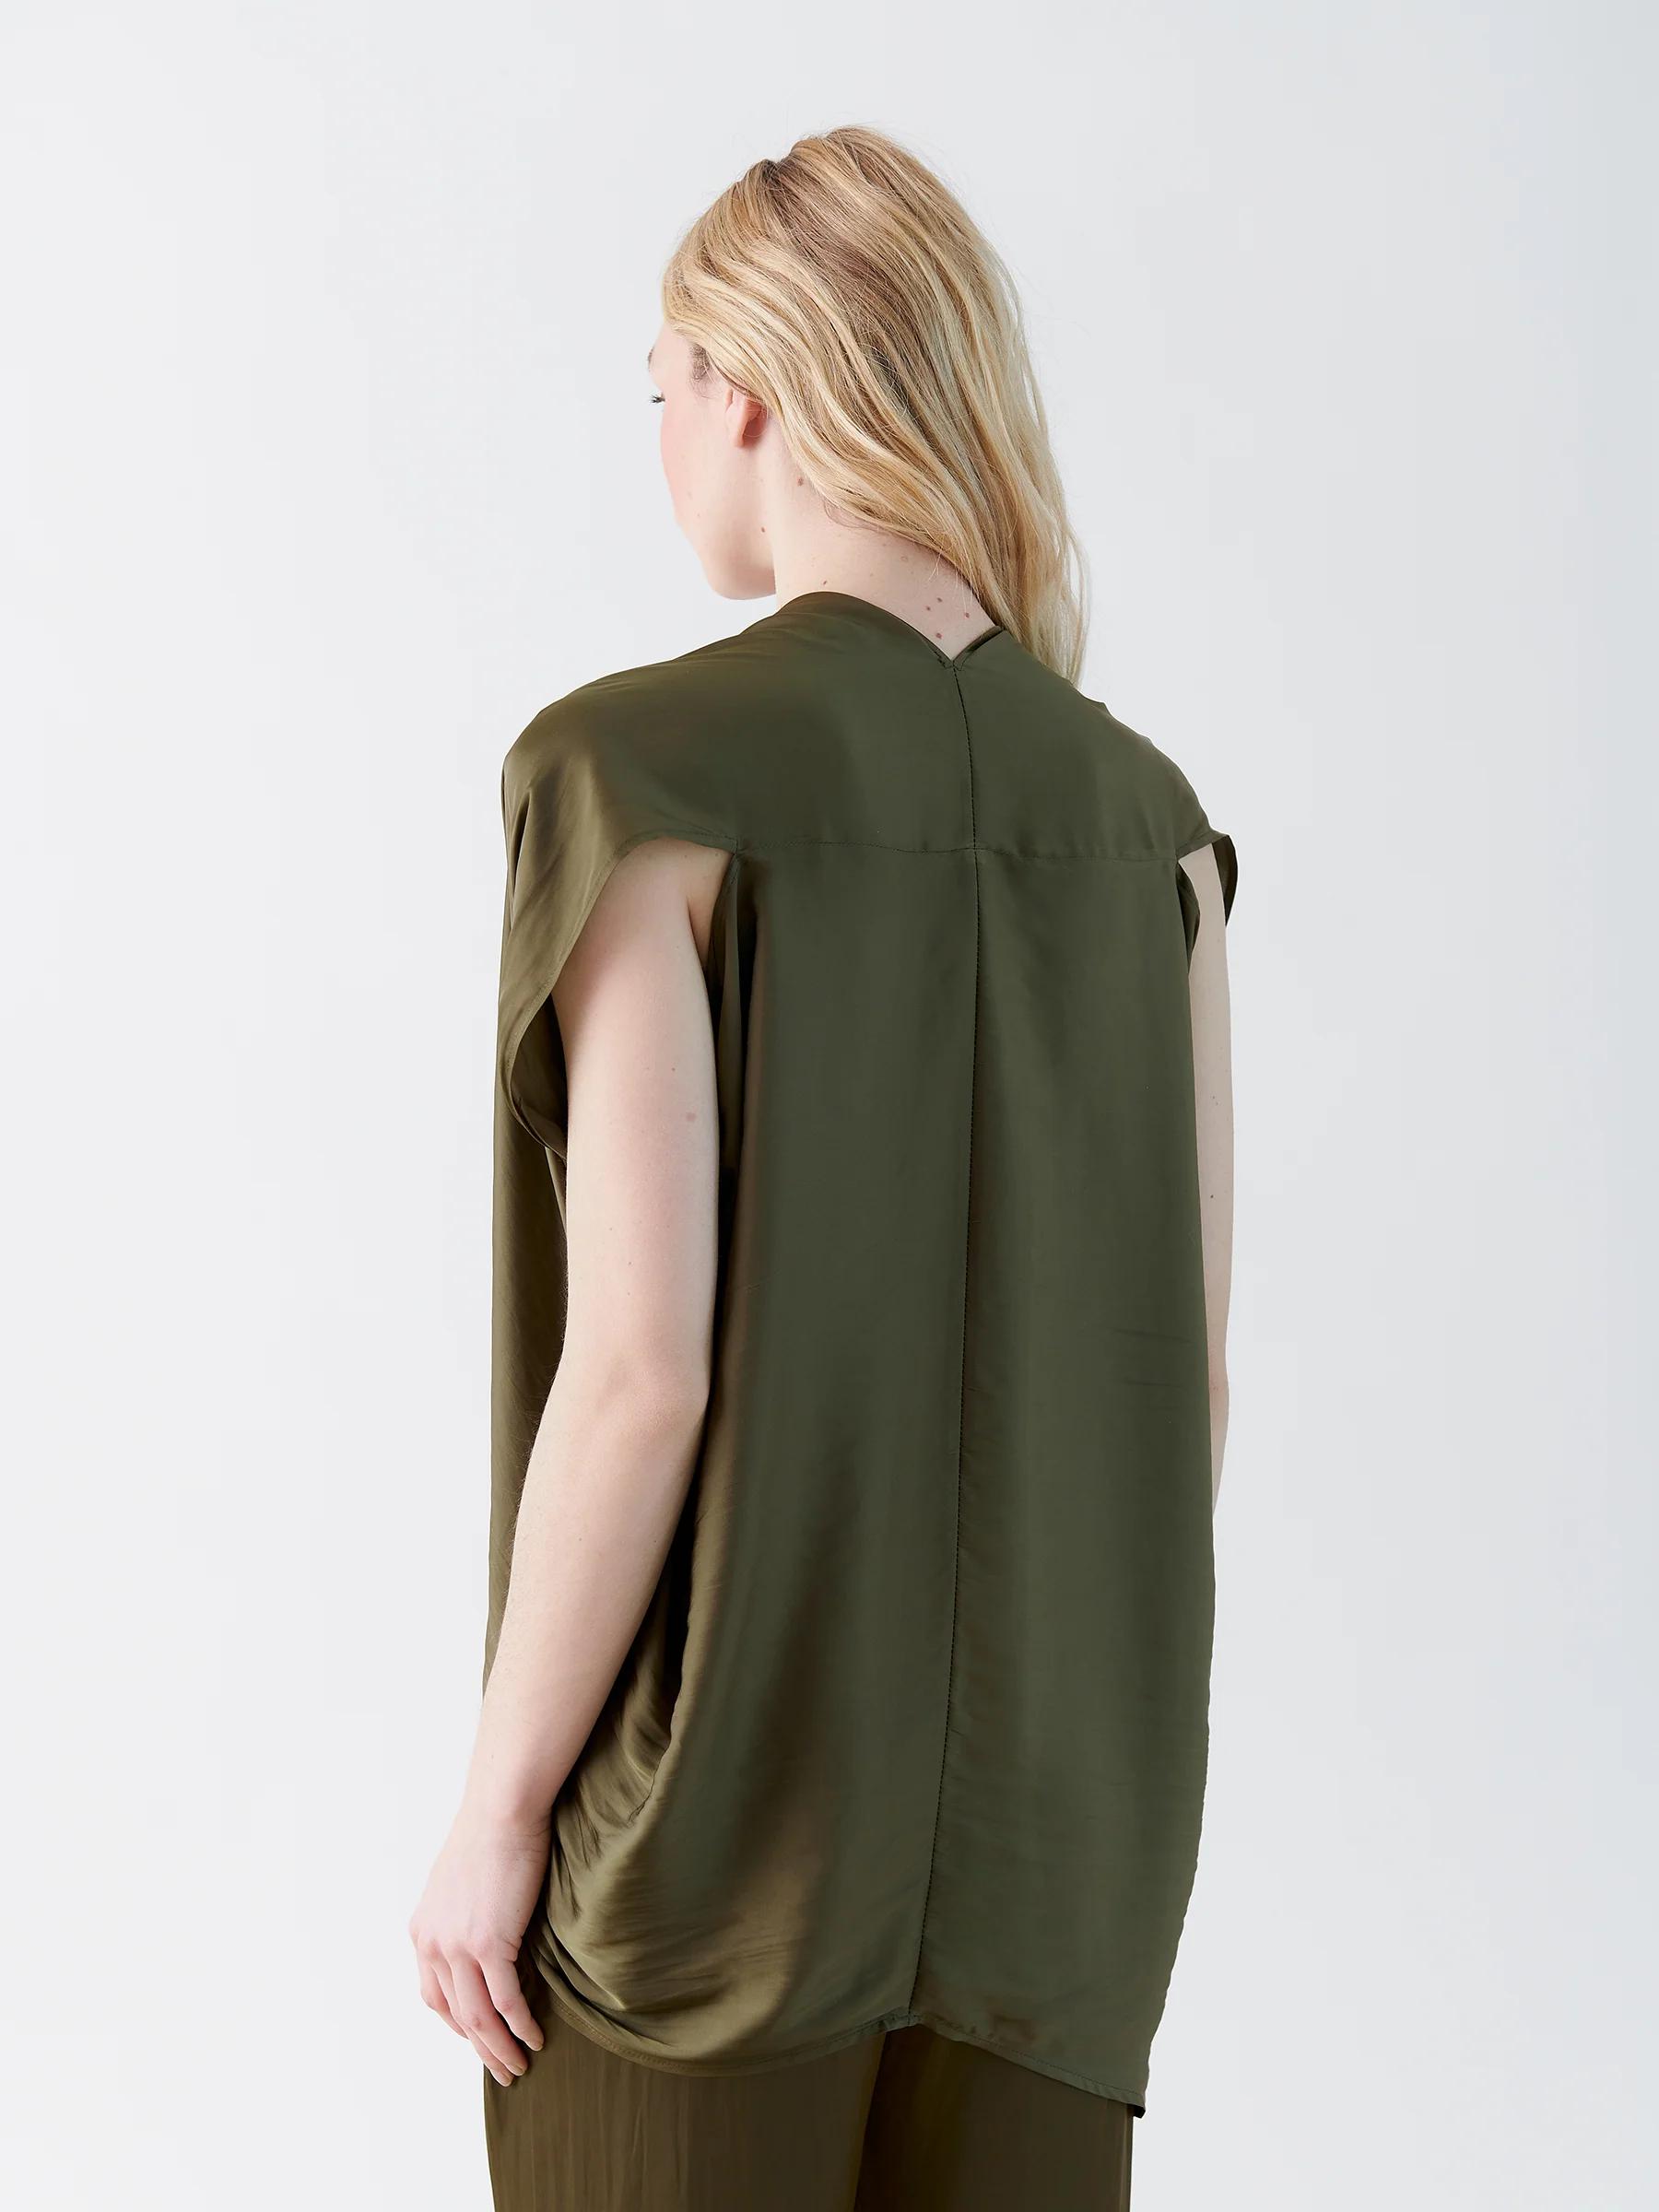 Product Image for Lena Drift Top, Olive